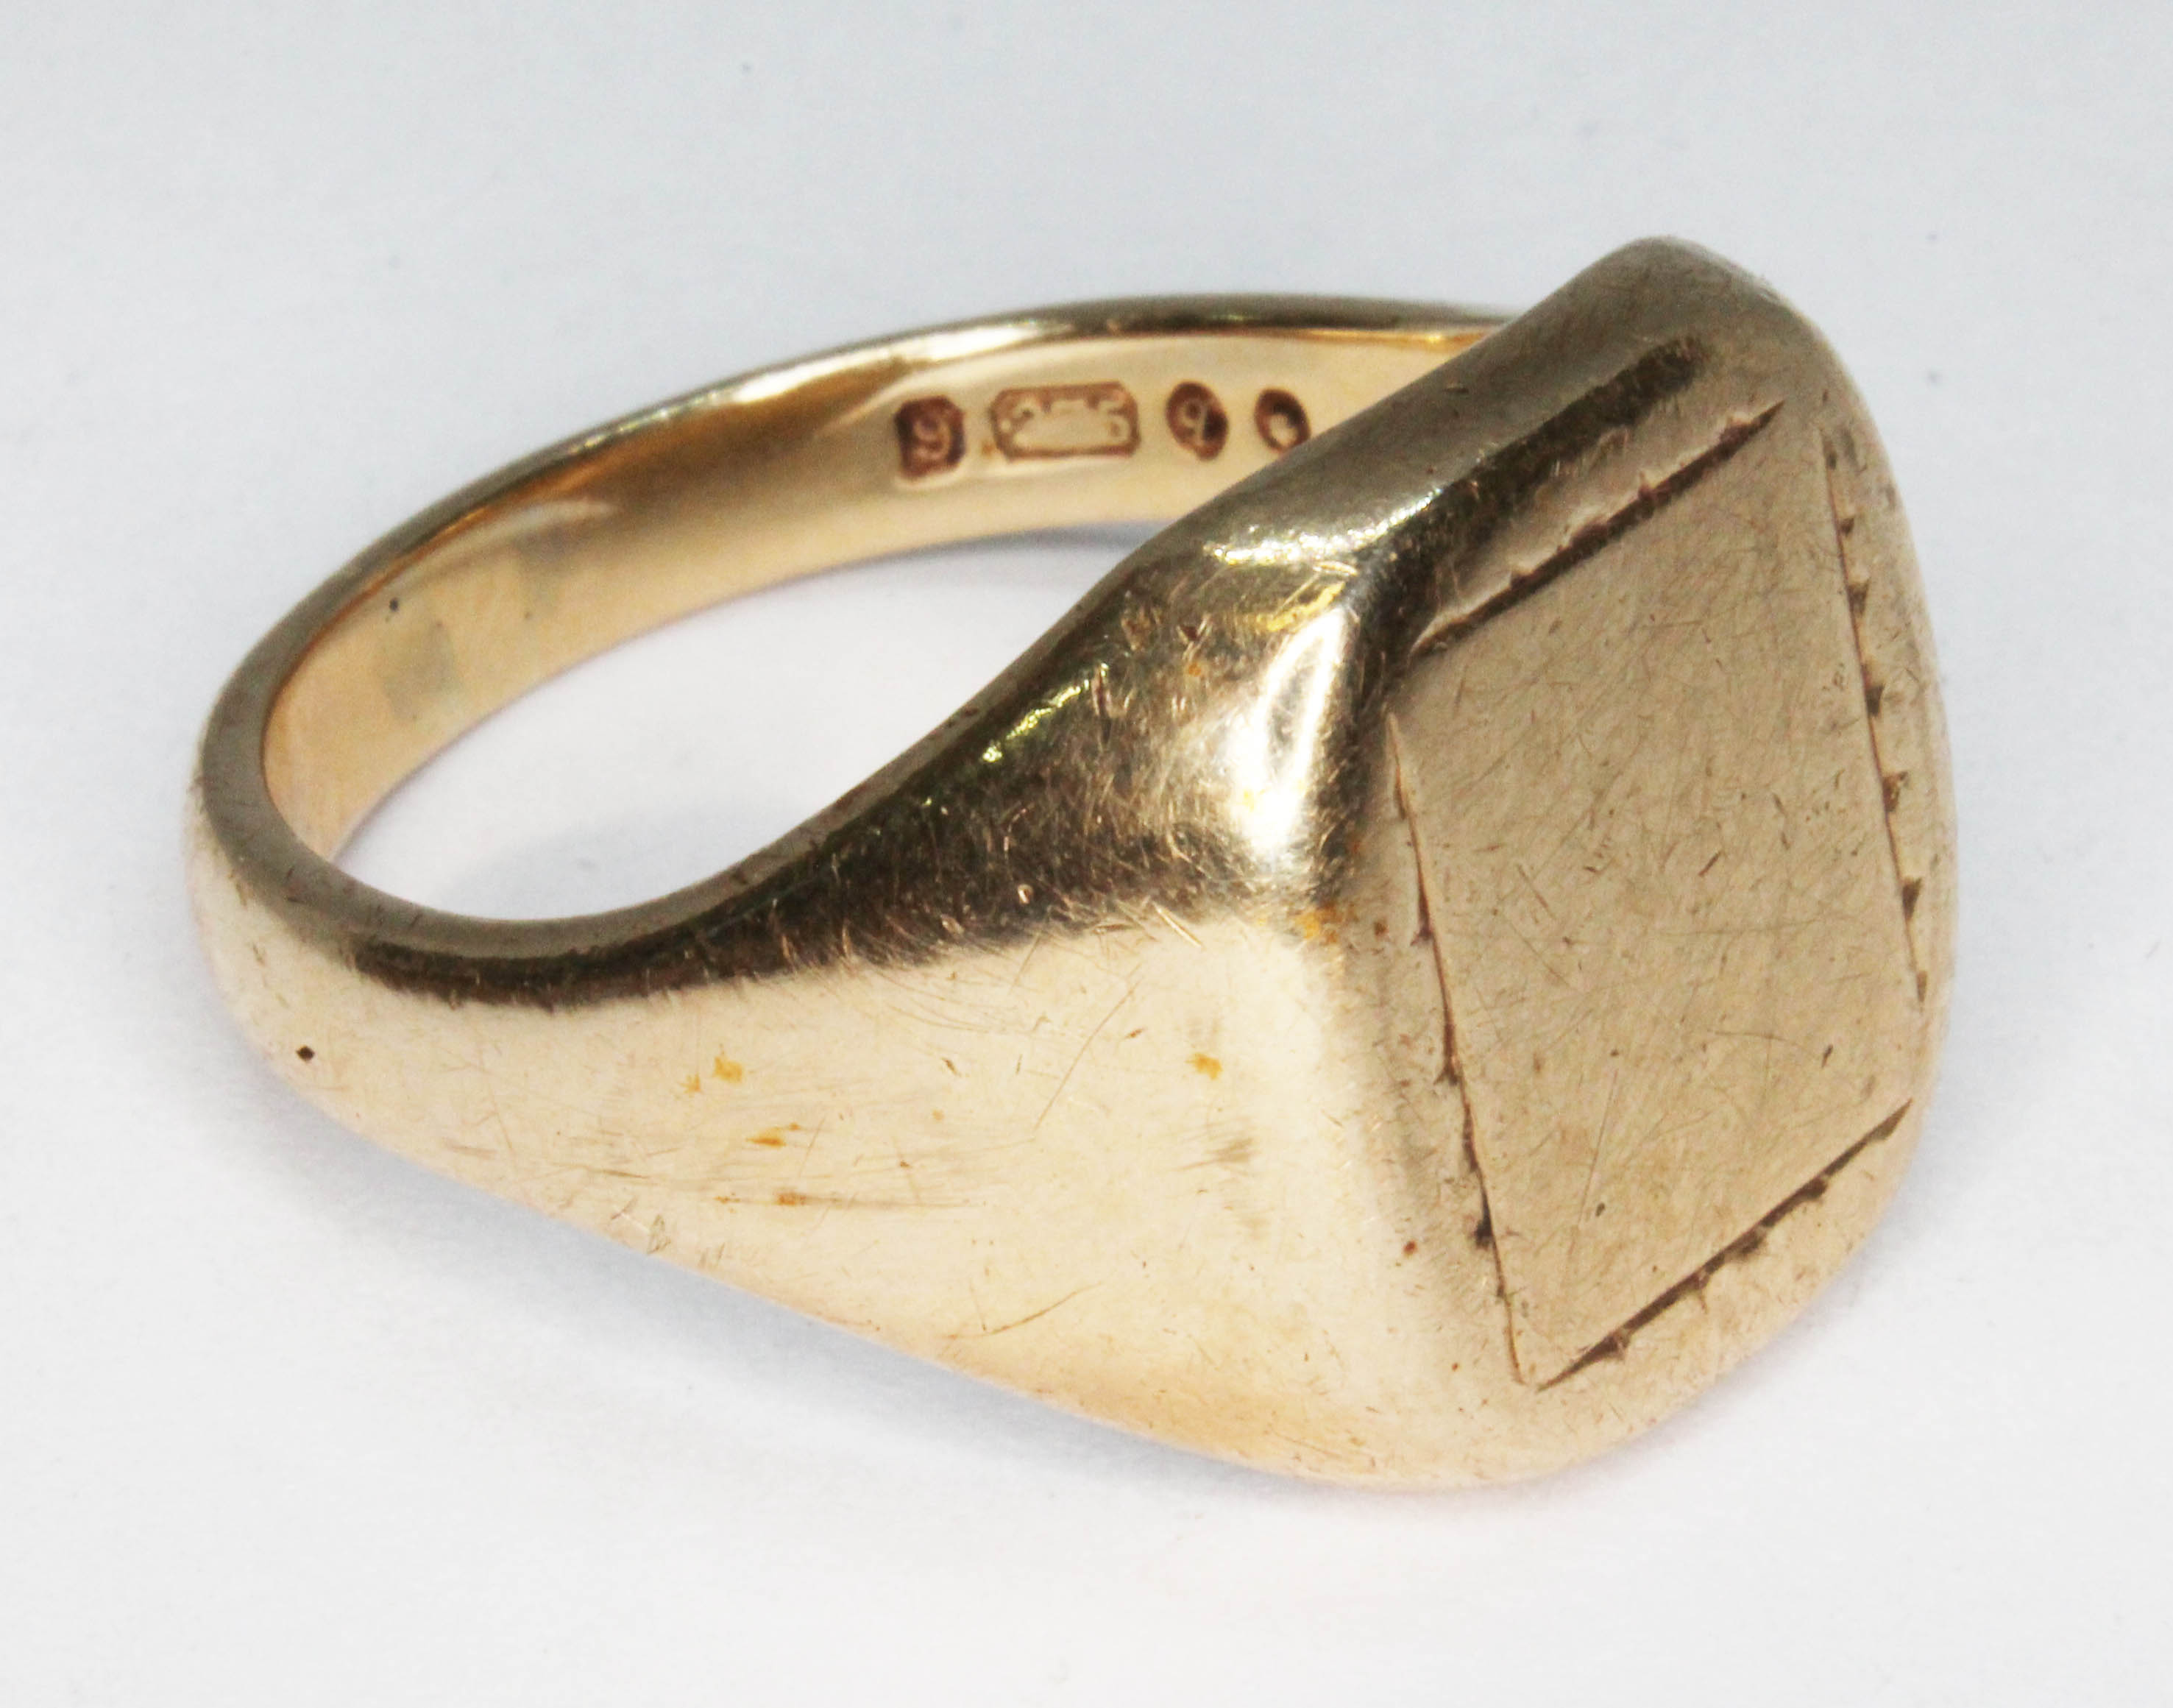 A hallmarked 9ct gold signet ring, wt. 11.9g, size T.